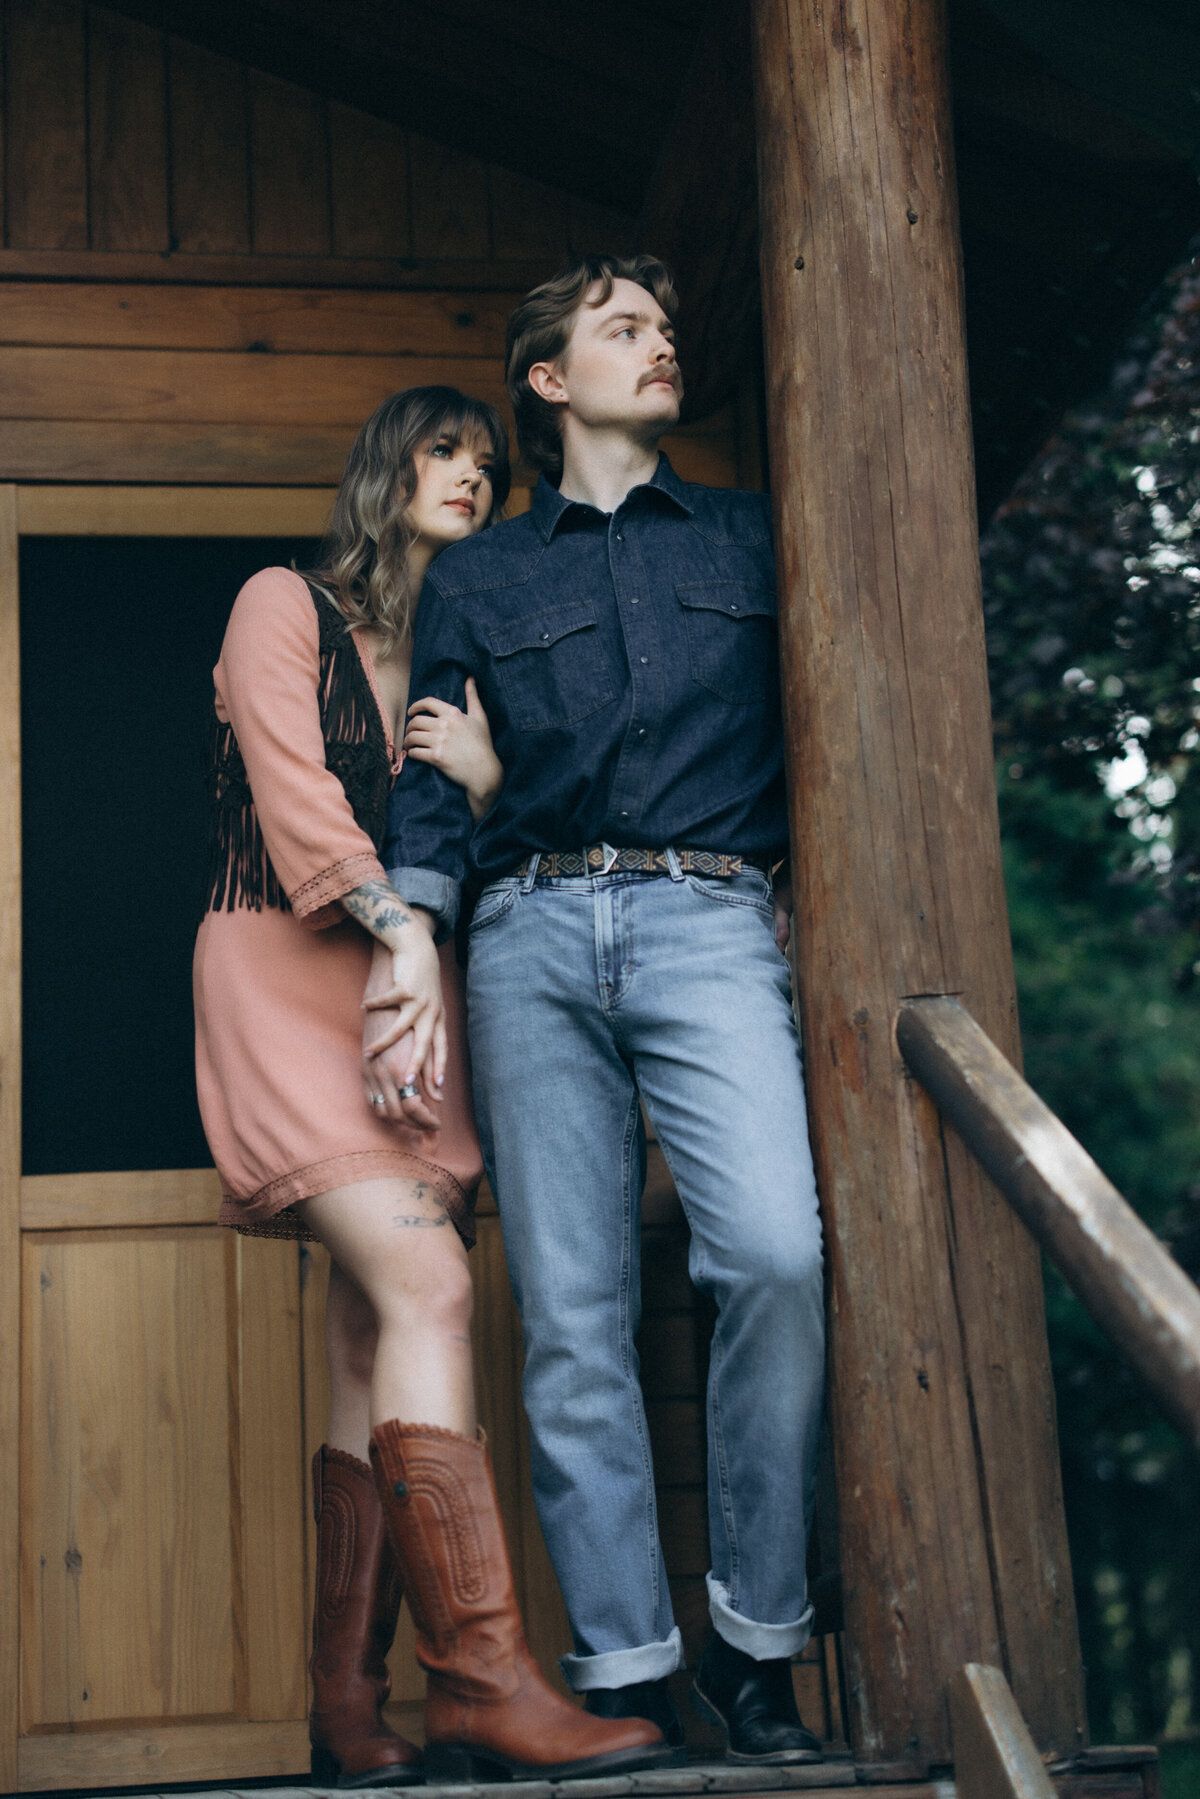 vpc-couples-vintage-cabin-shoot-27